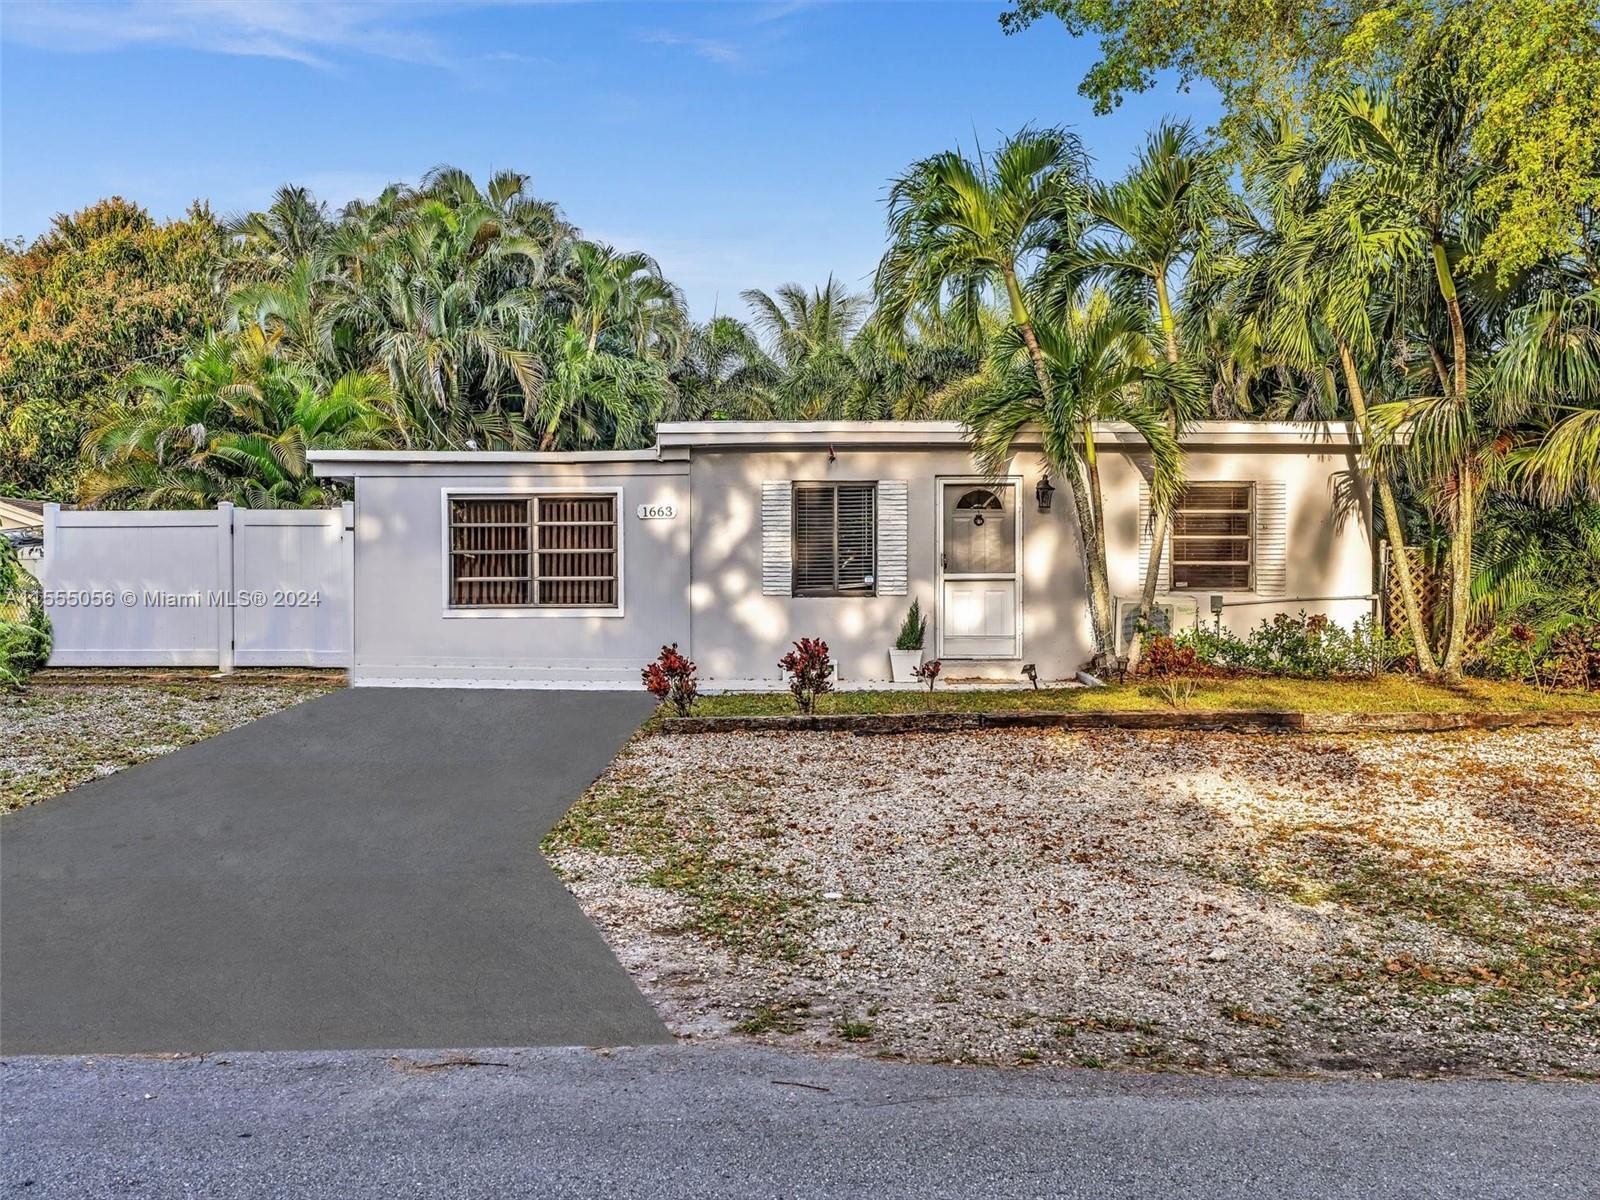 Photo of 1663 SW 28th Ave in Fort Lauderdale, FL